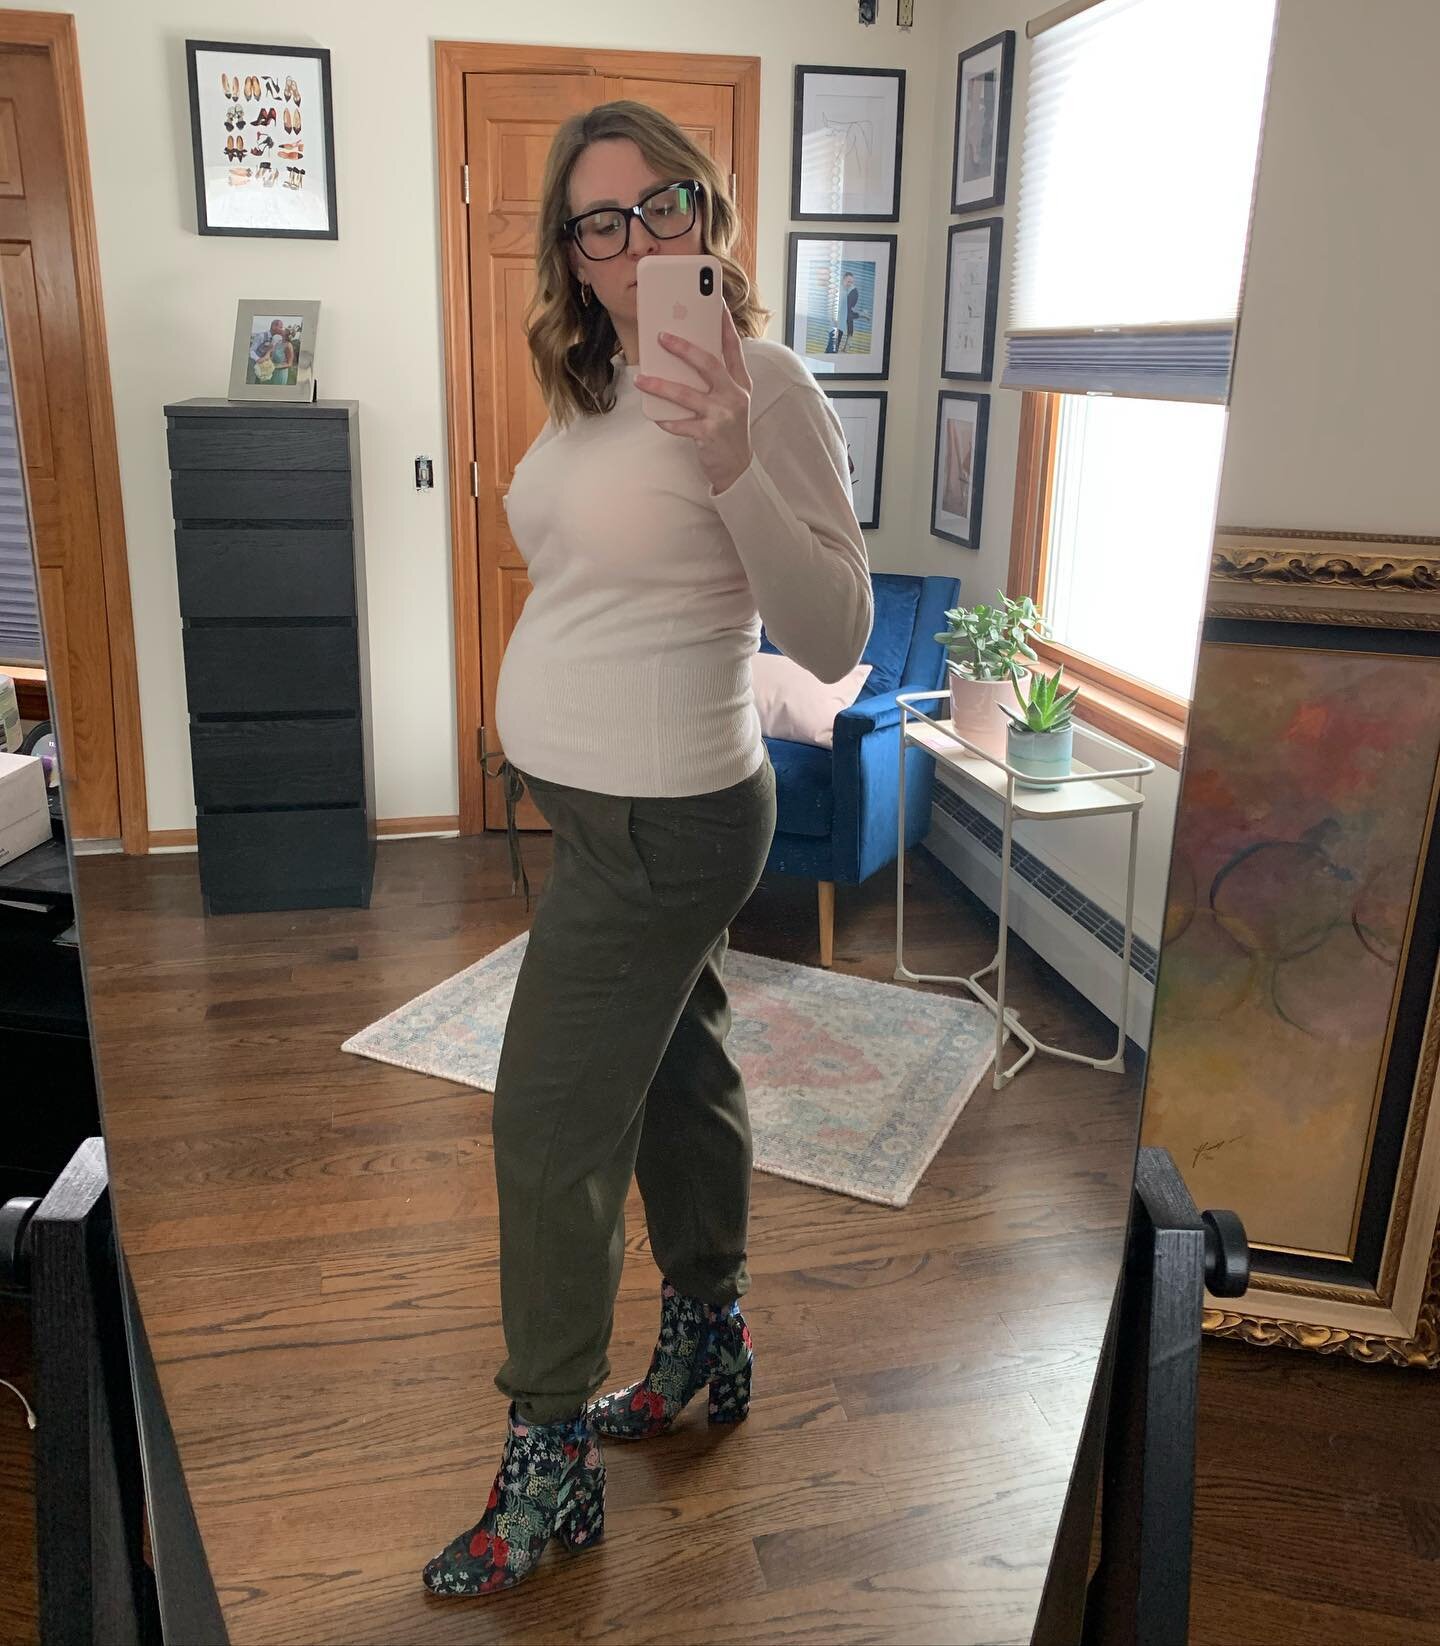 26 weeks in cashmere and booties versus 30 weeks in a sweatshirt and sneakers. These @hm maturity joggers are the true hero. And I clearly love a good olive green and blush pink pairing 😊